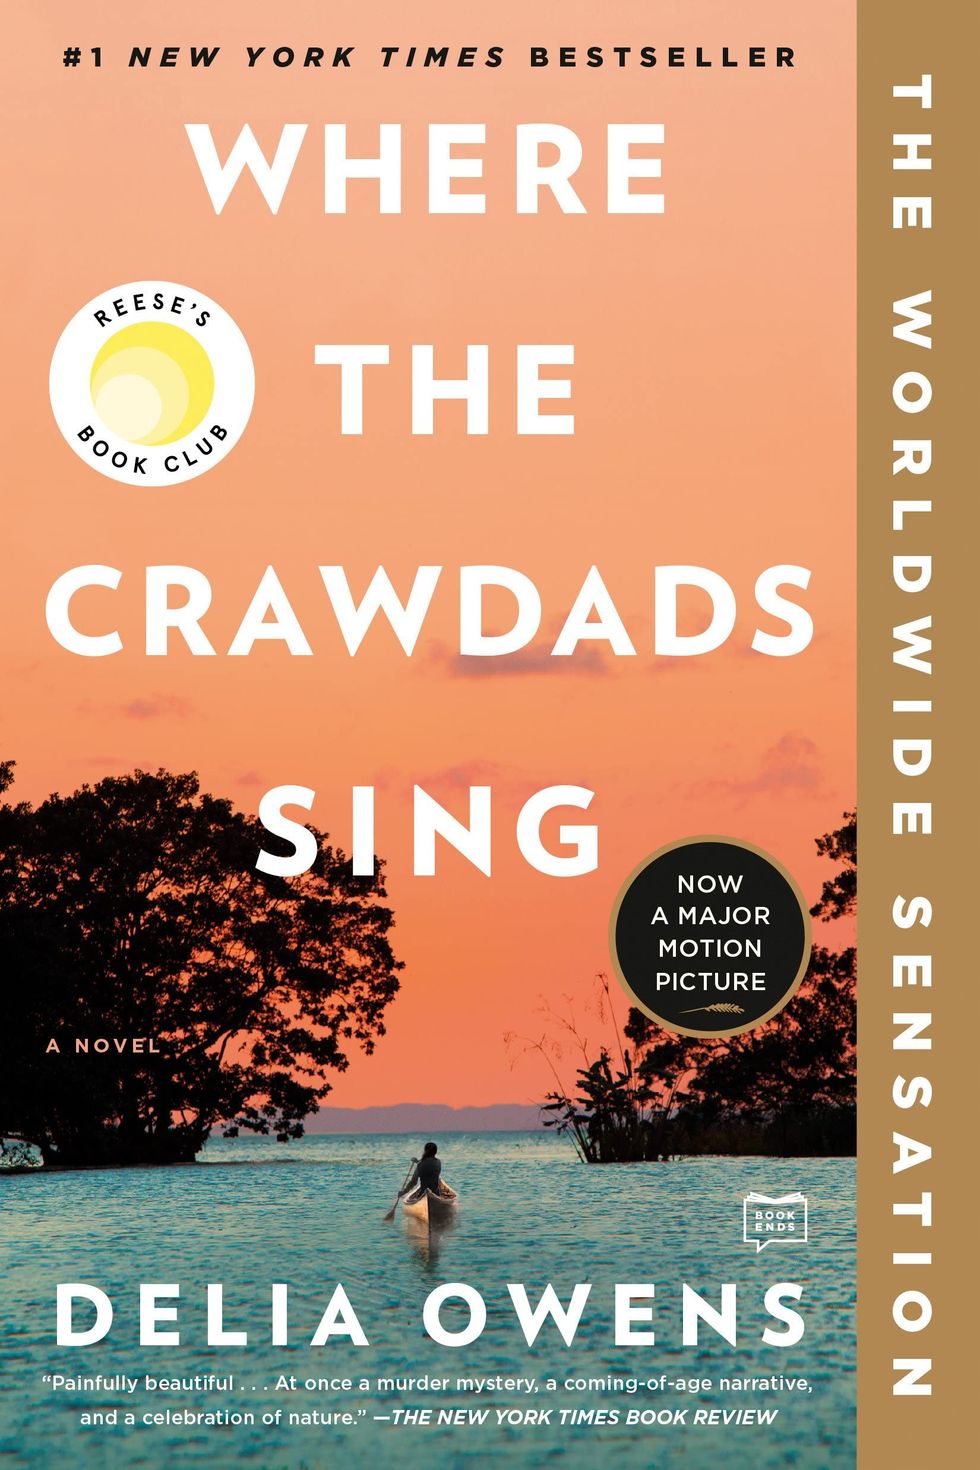 "Where The Crawdads Sing" by Delia Owens